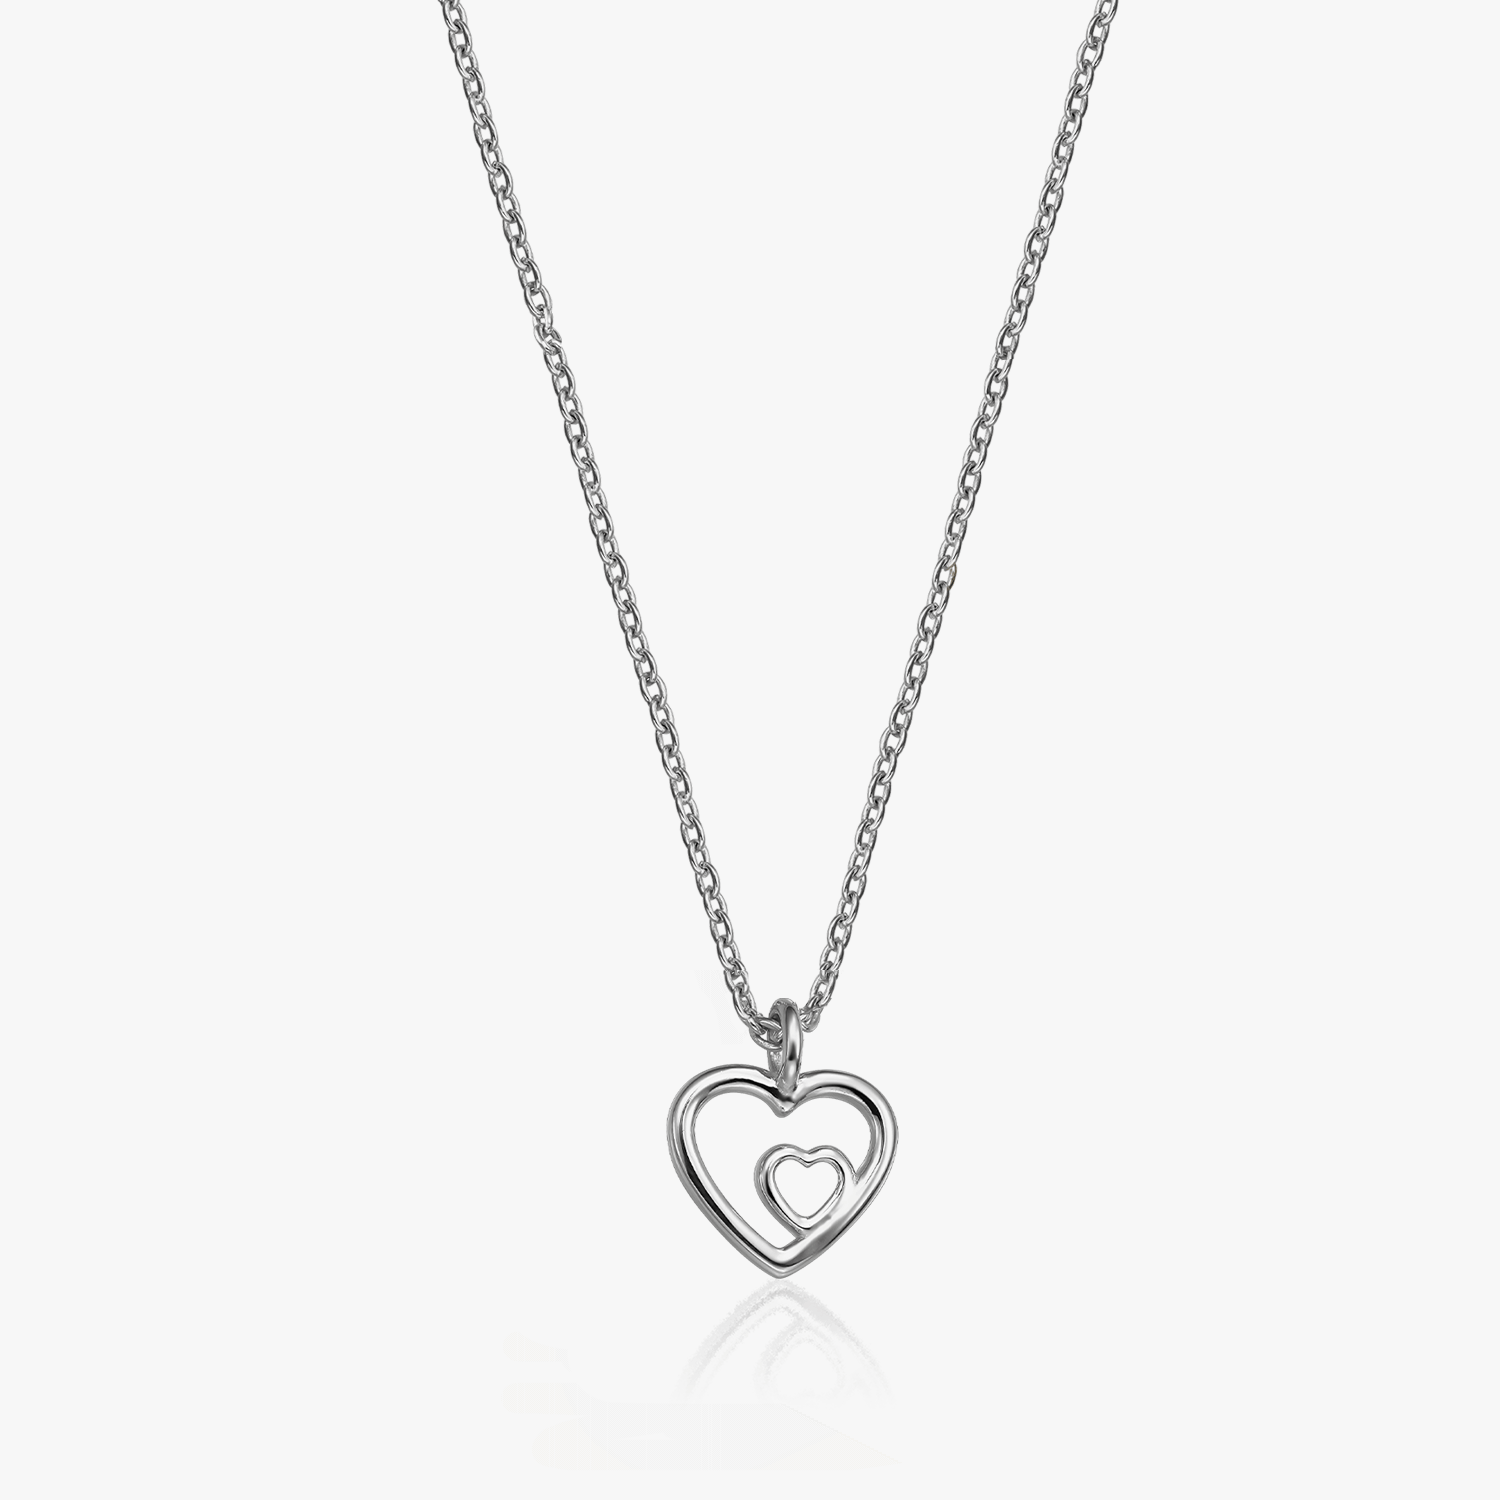 In Love silver necklace